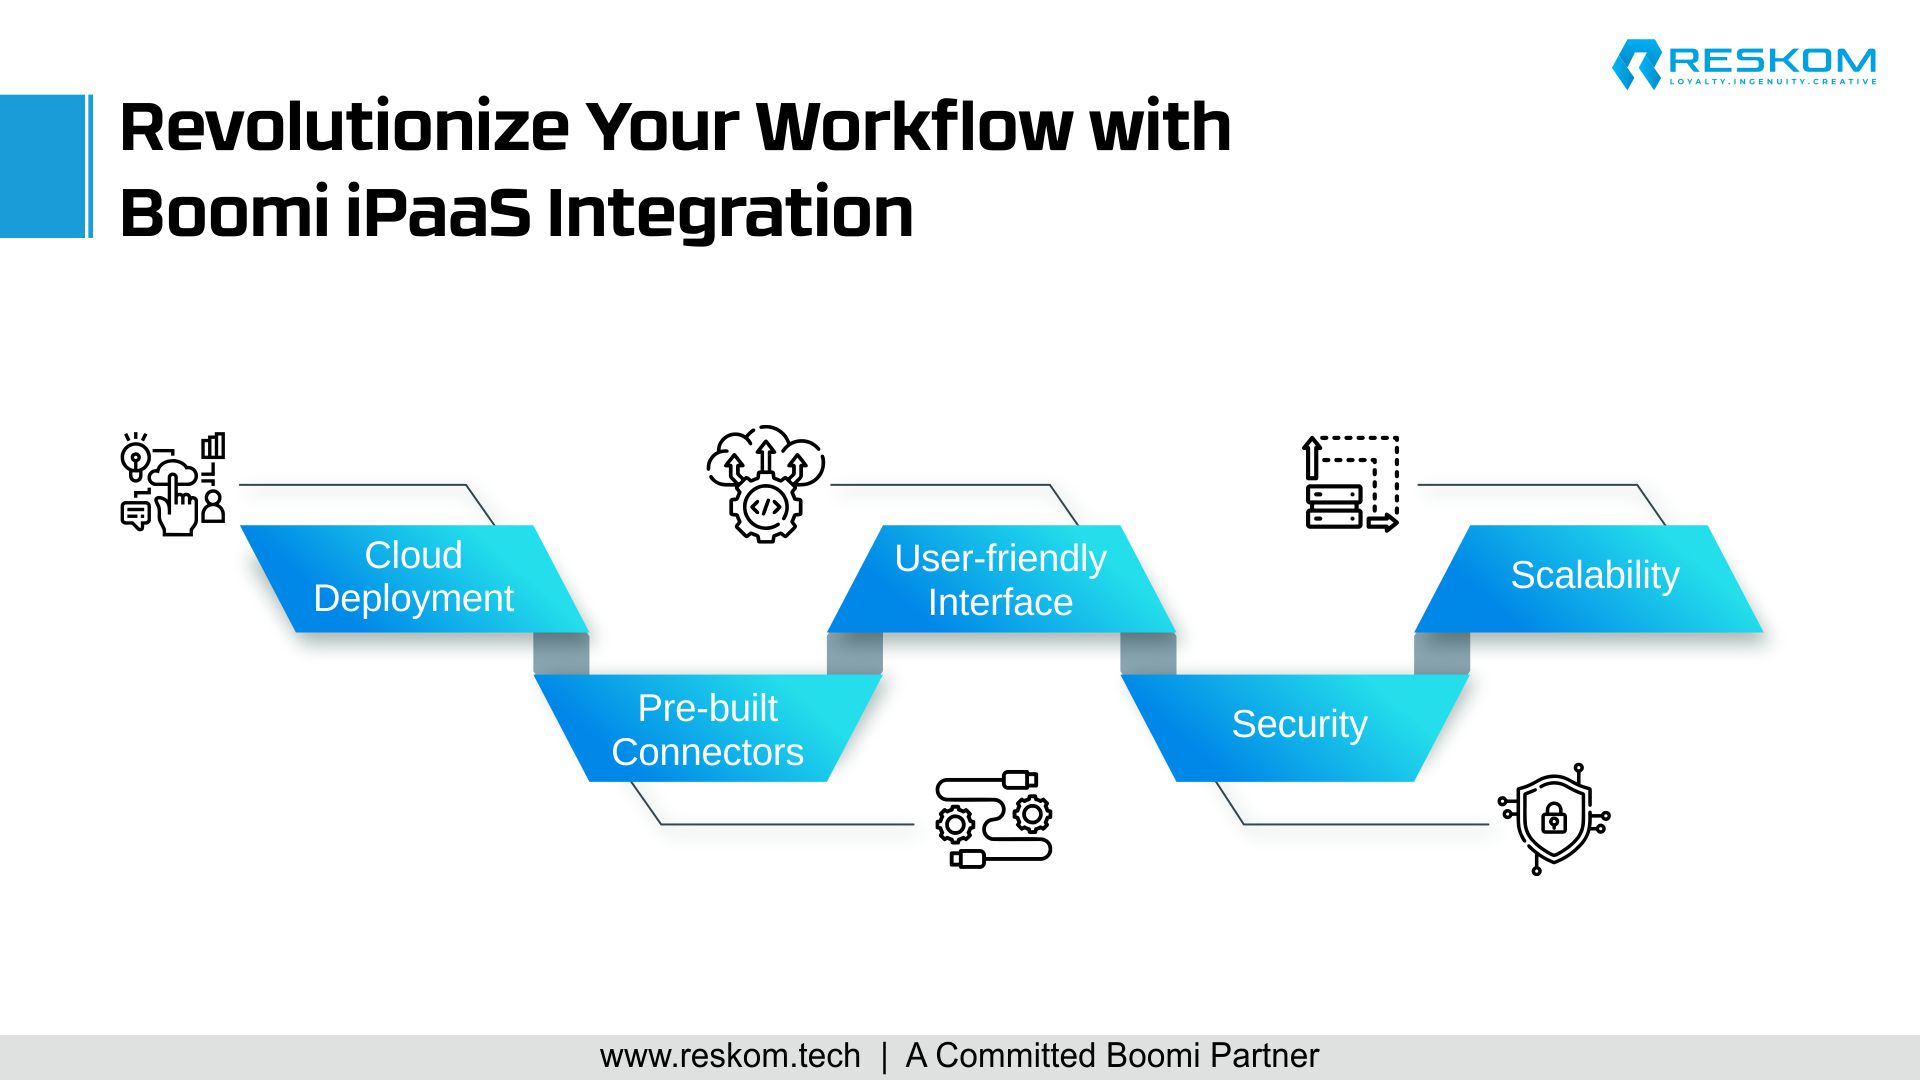 Infographics - Revolutionize Your Workflow with Boomi iPaaS Integration